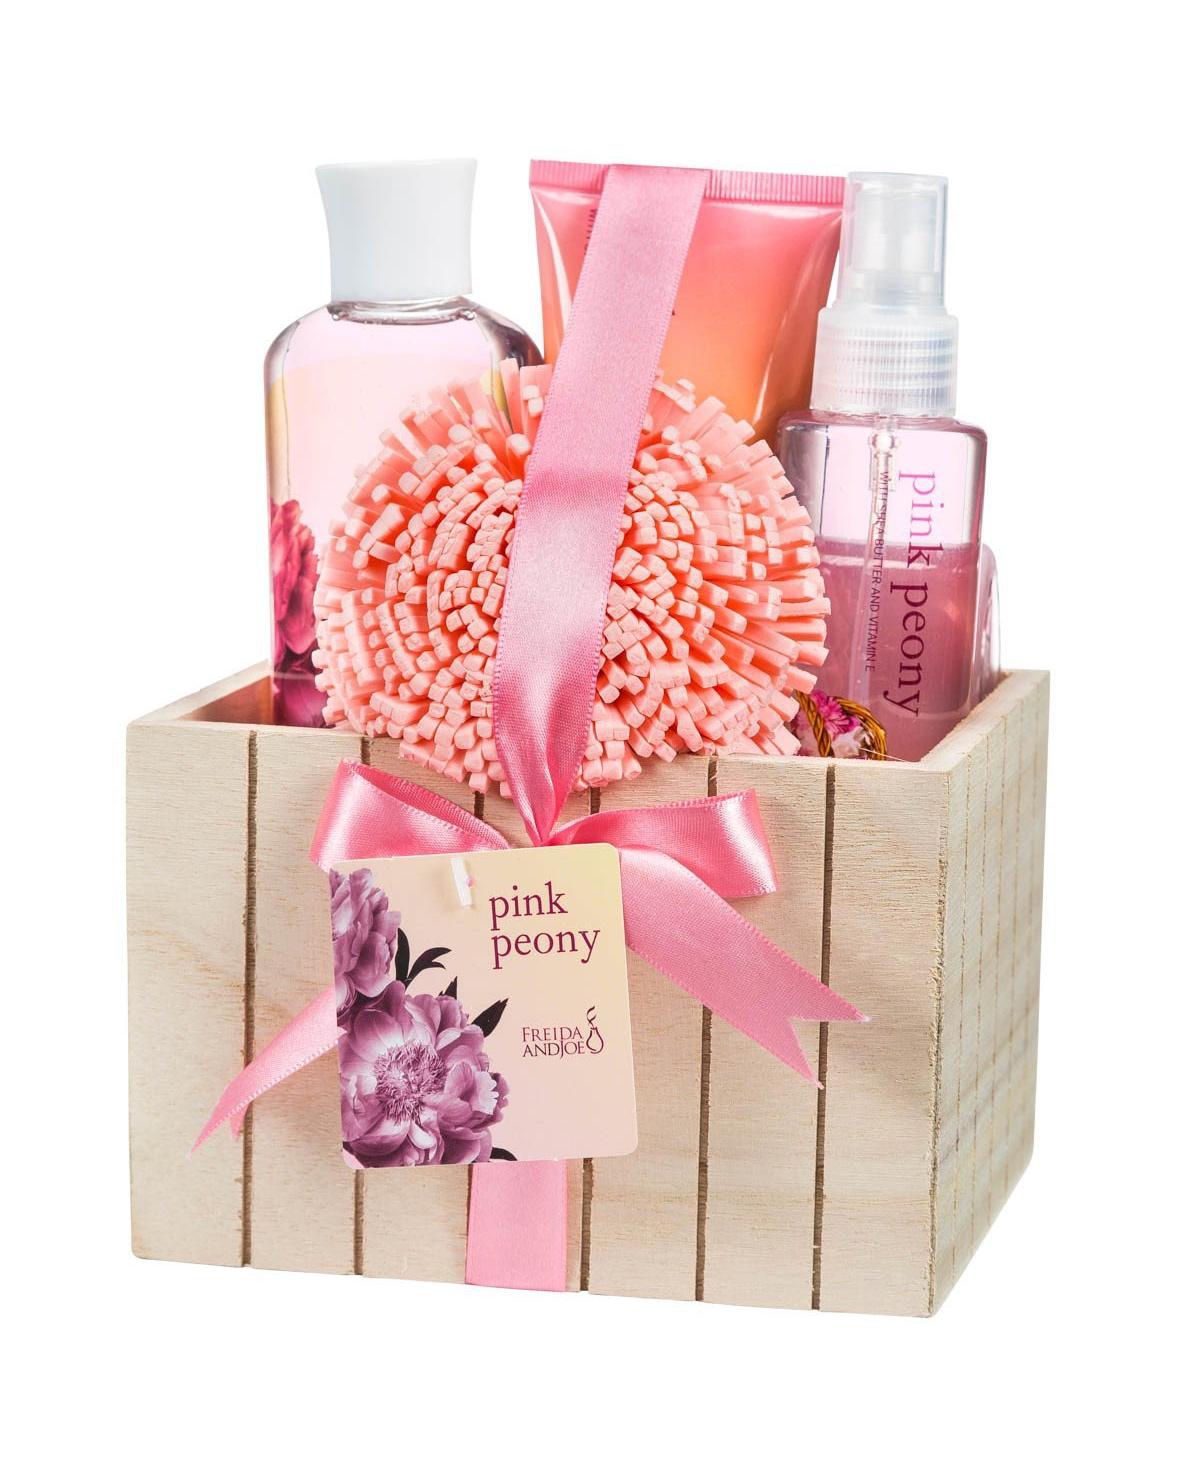 Pink Peony Fragrance Bath & Body Spa Set in Natural Wood Plant Box - Pink